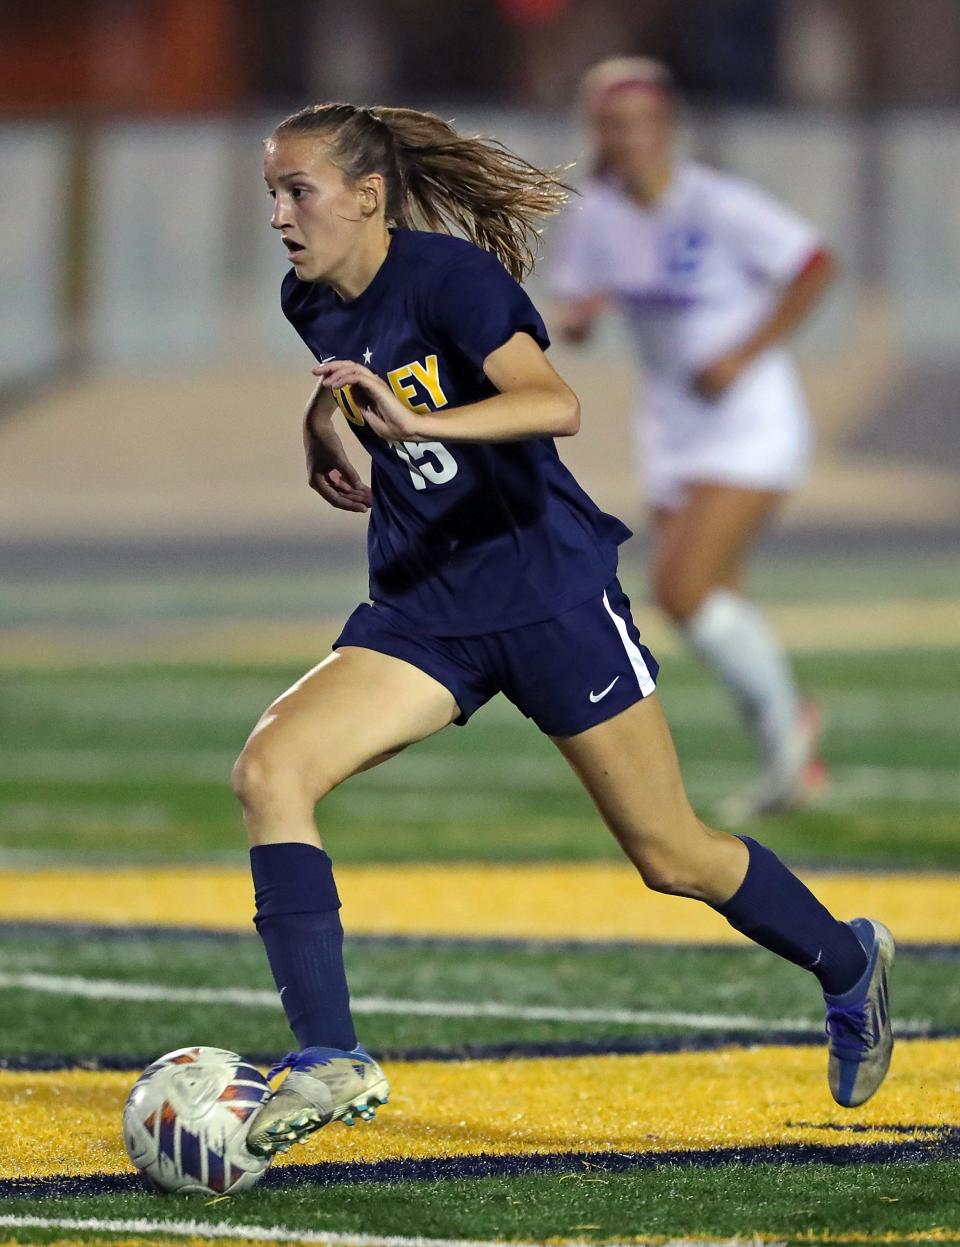 Copley's Kate Young takes the ball up the field against Revere during the second half Wednesday in Copley.